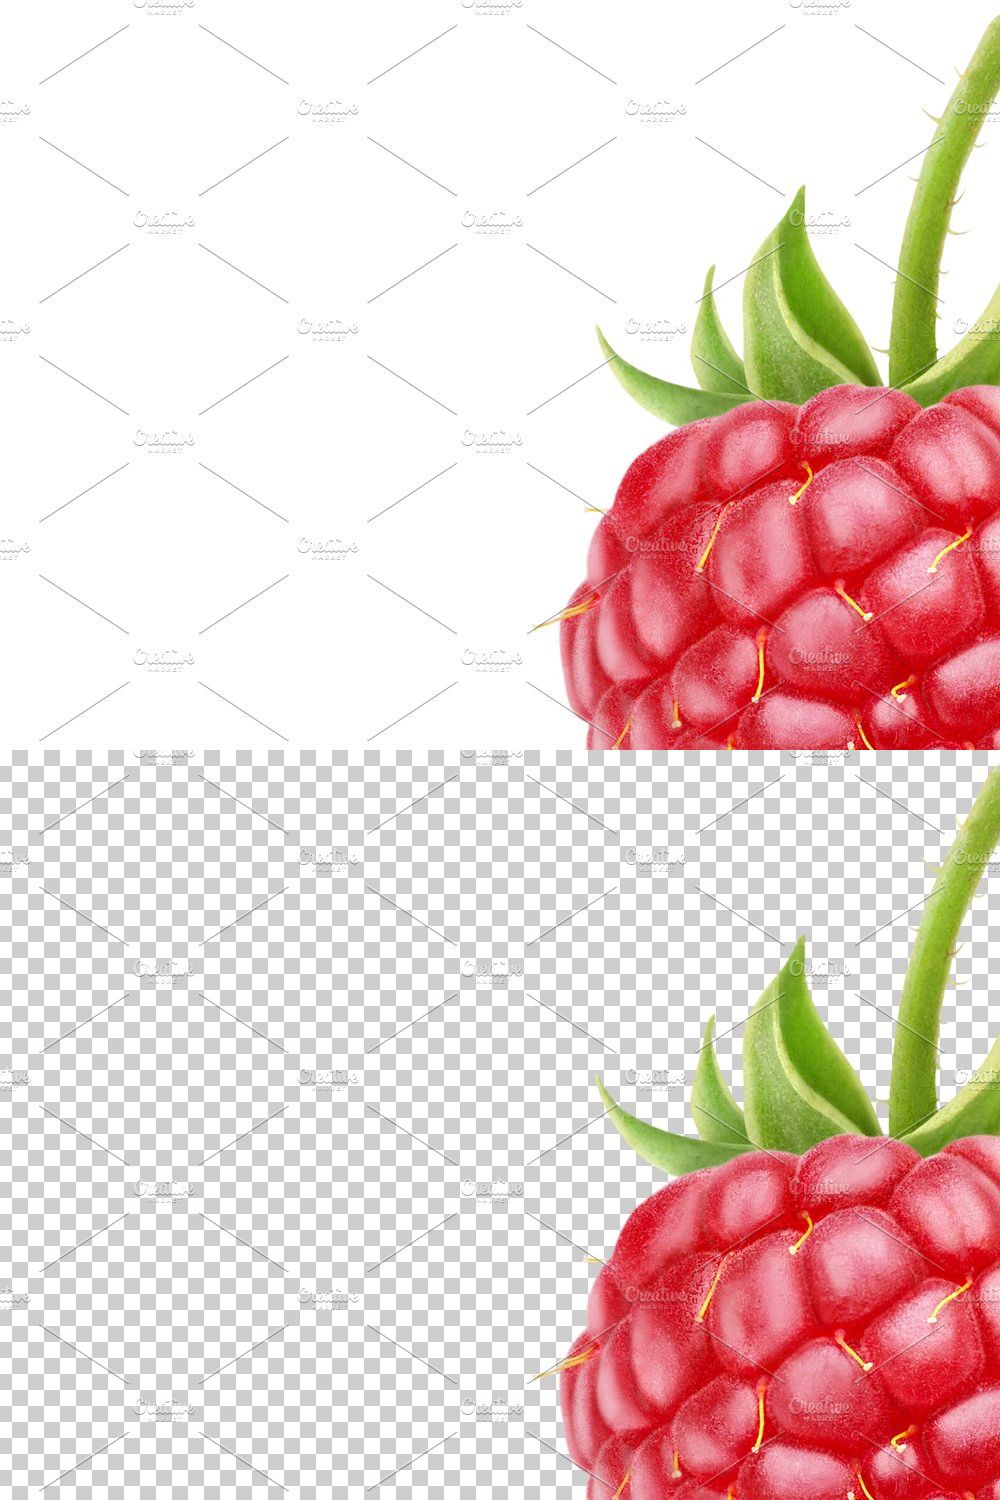 One raspberry pinterest preview image.